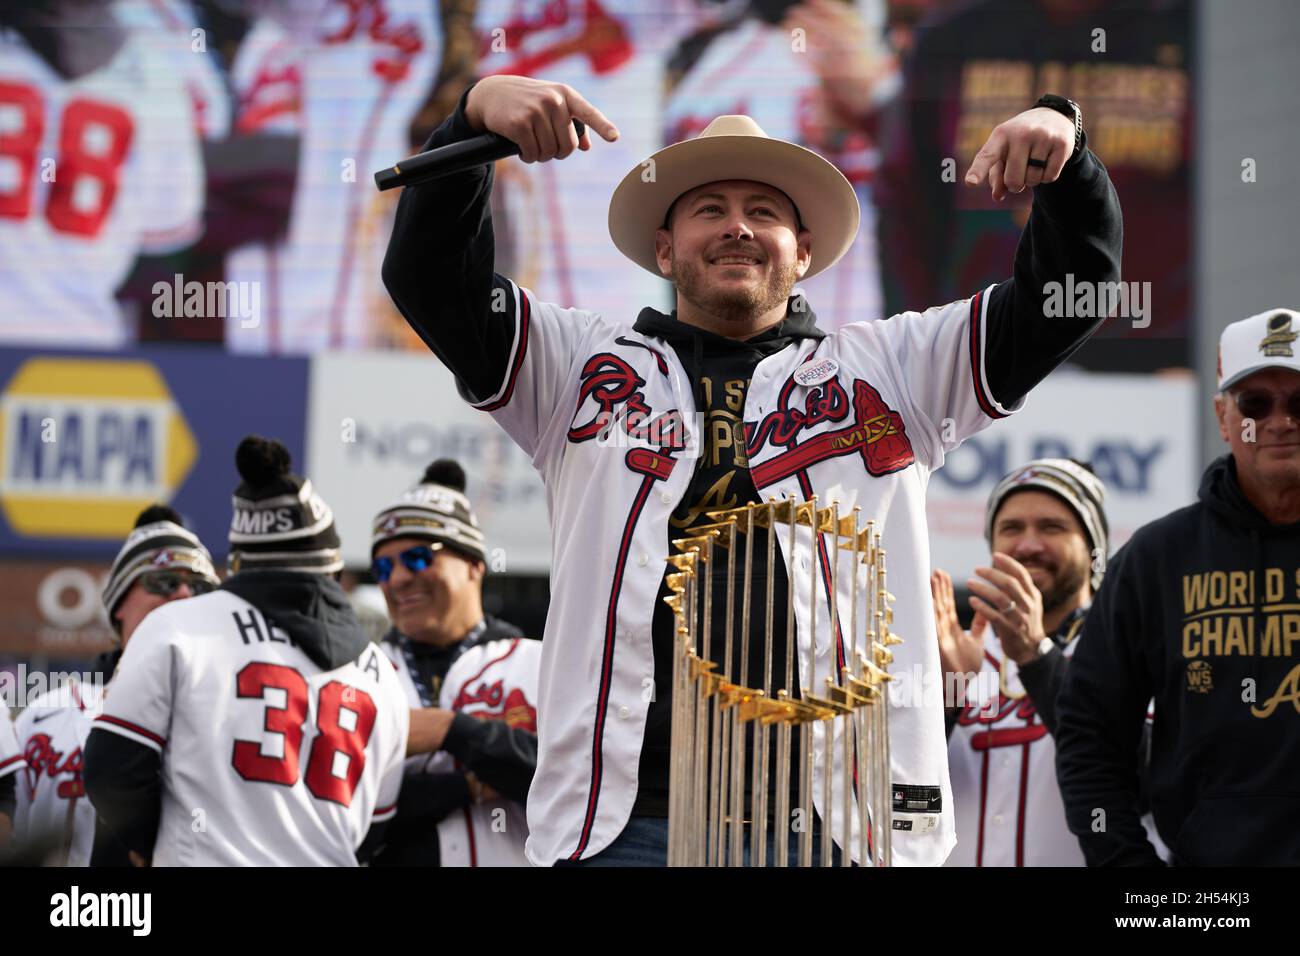 Atlanta, USA. 05th Nov, 2021. Pitcher Tyler Matzek addresses fans at a  ceremony after a parade to celebrate the World Series Championship for the  Atlanta Braves at Truist Park in Atlanta, Georgia